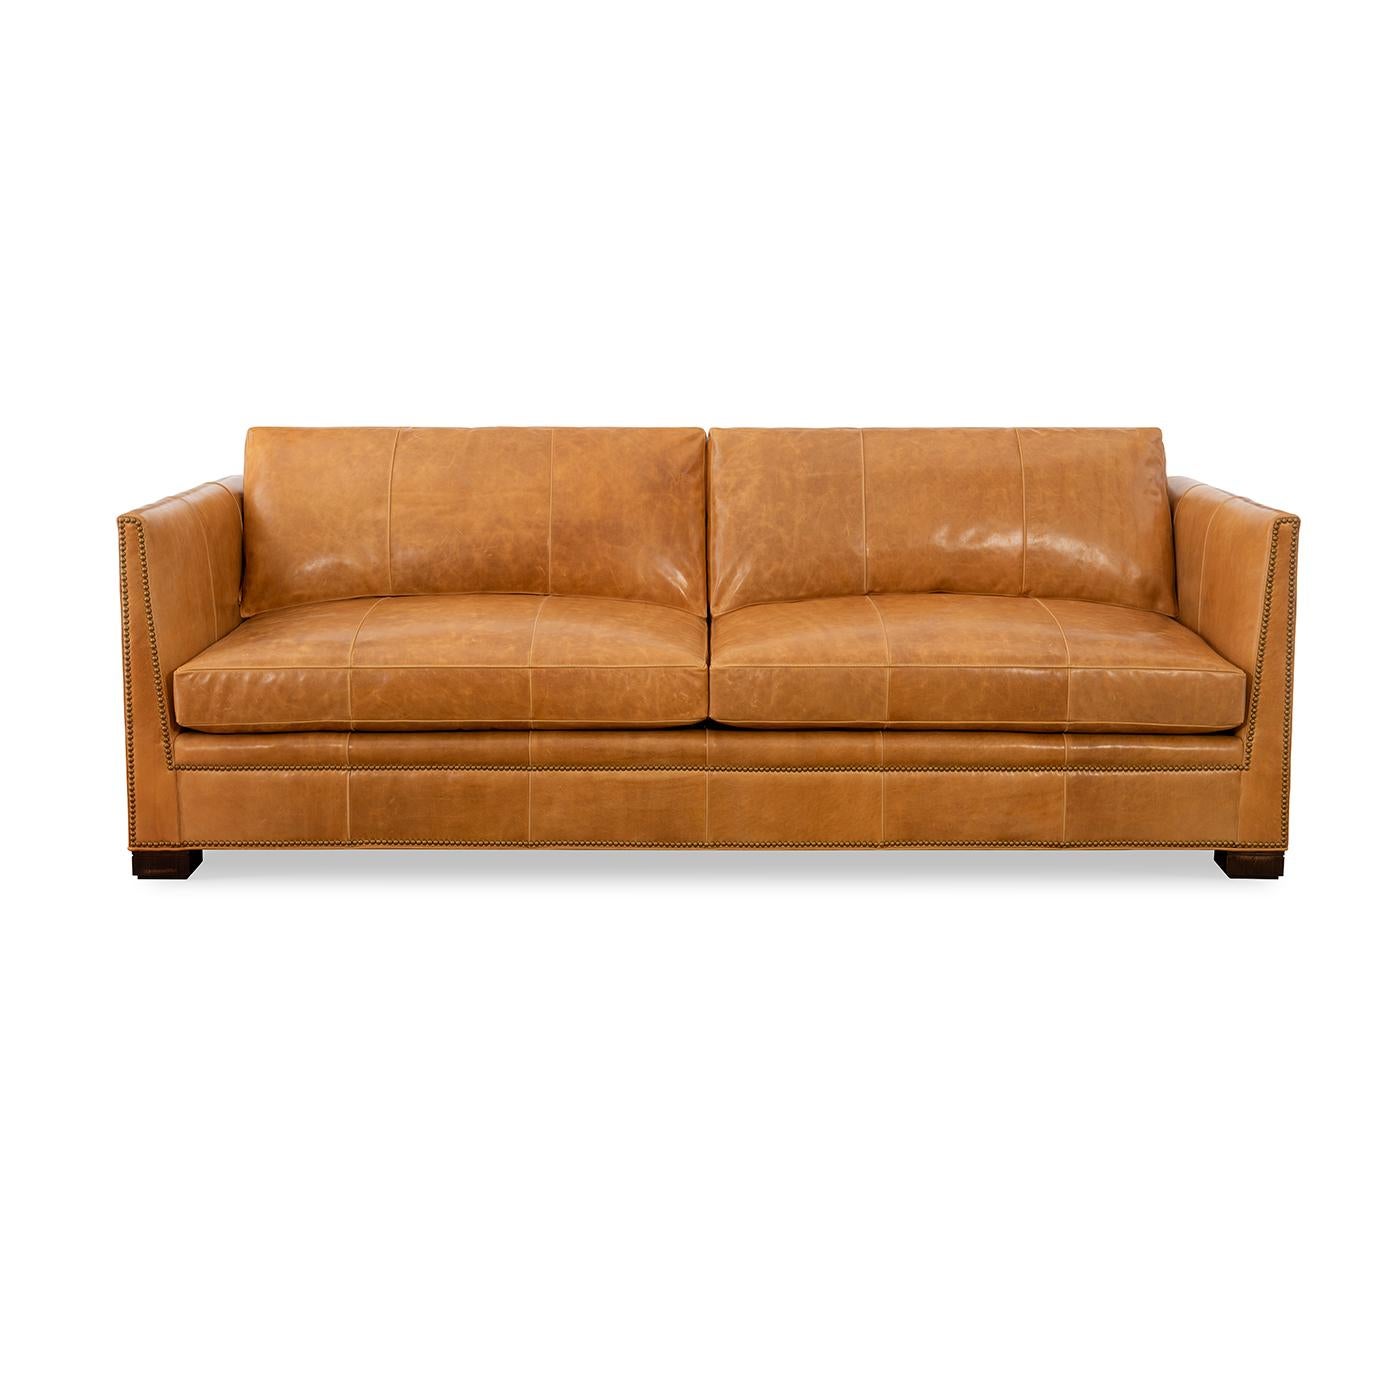 A Modern leather upholstered sofa with sleek modern lines and raised on bold block feet. Two long loose pillow backs with two long comfort down seat cushions.

Shown in Madrid Spice leather with brass nailhead trim details outlining the angled arm